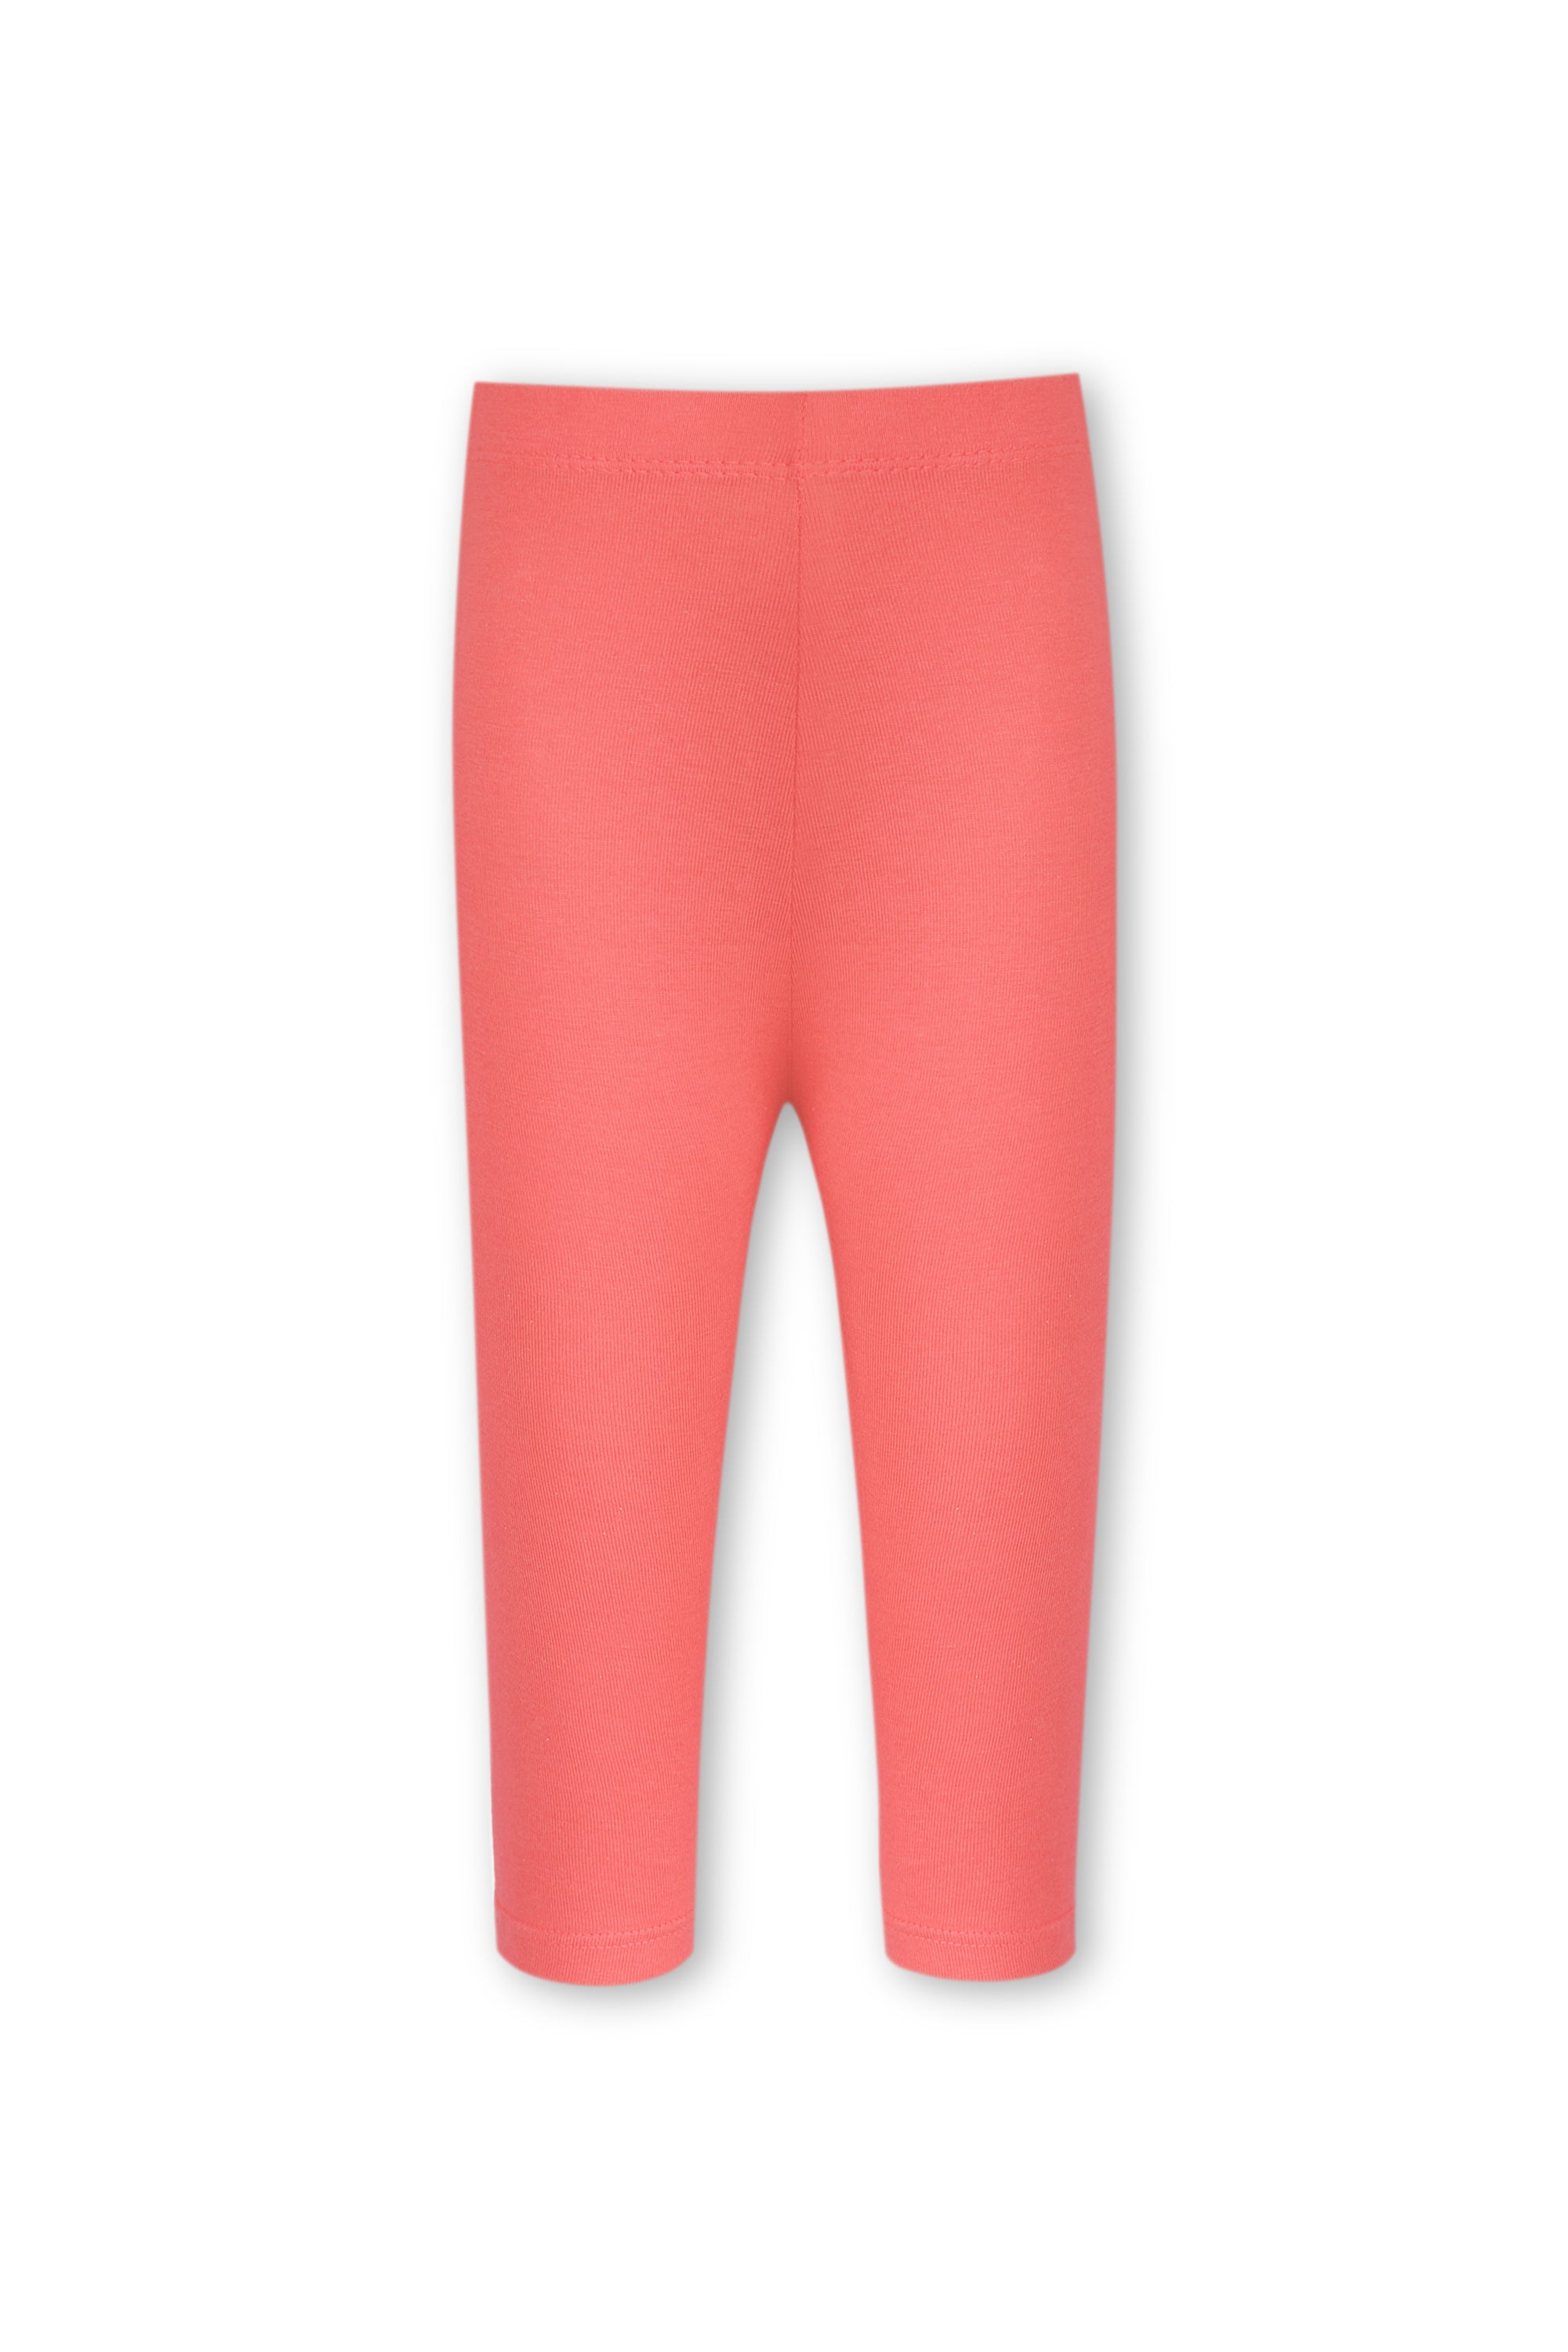 Girls Pink Jersey Tights